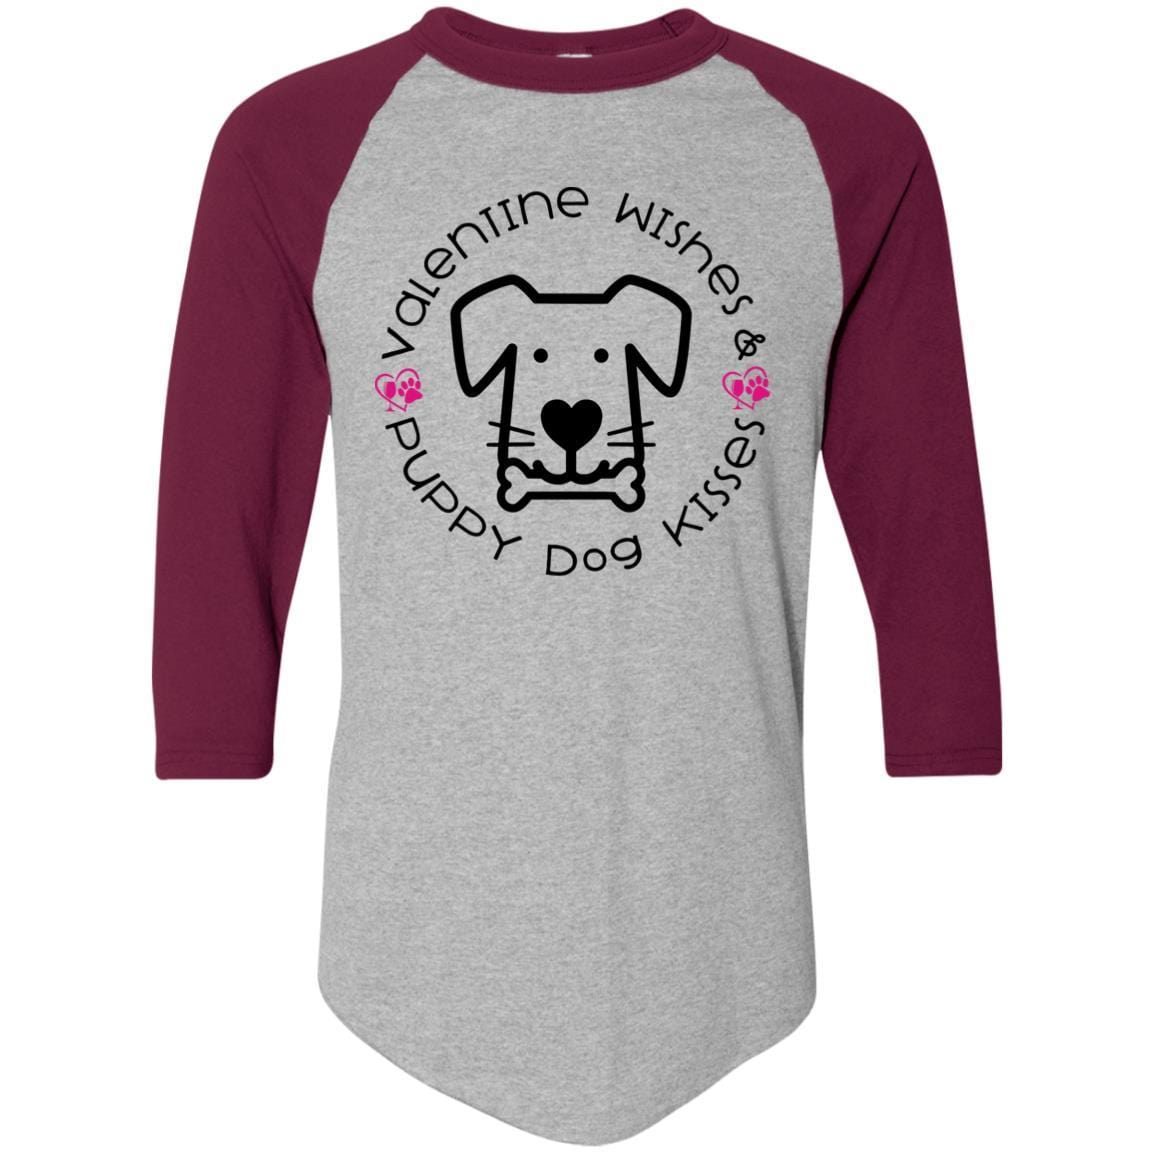 T-Shirts Athletic Heather/Maroon / S Winey Bitches Co 'Valentine Wishes and Puppy Dog Kisses" (Dog) Colorblock Raglan Jersey WineyBitchesCo